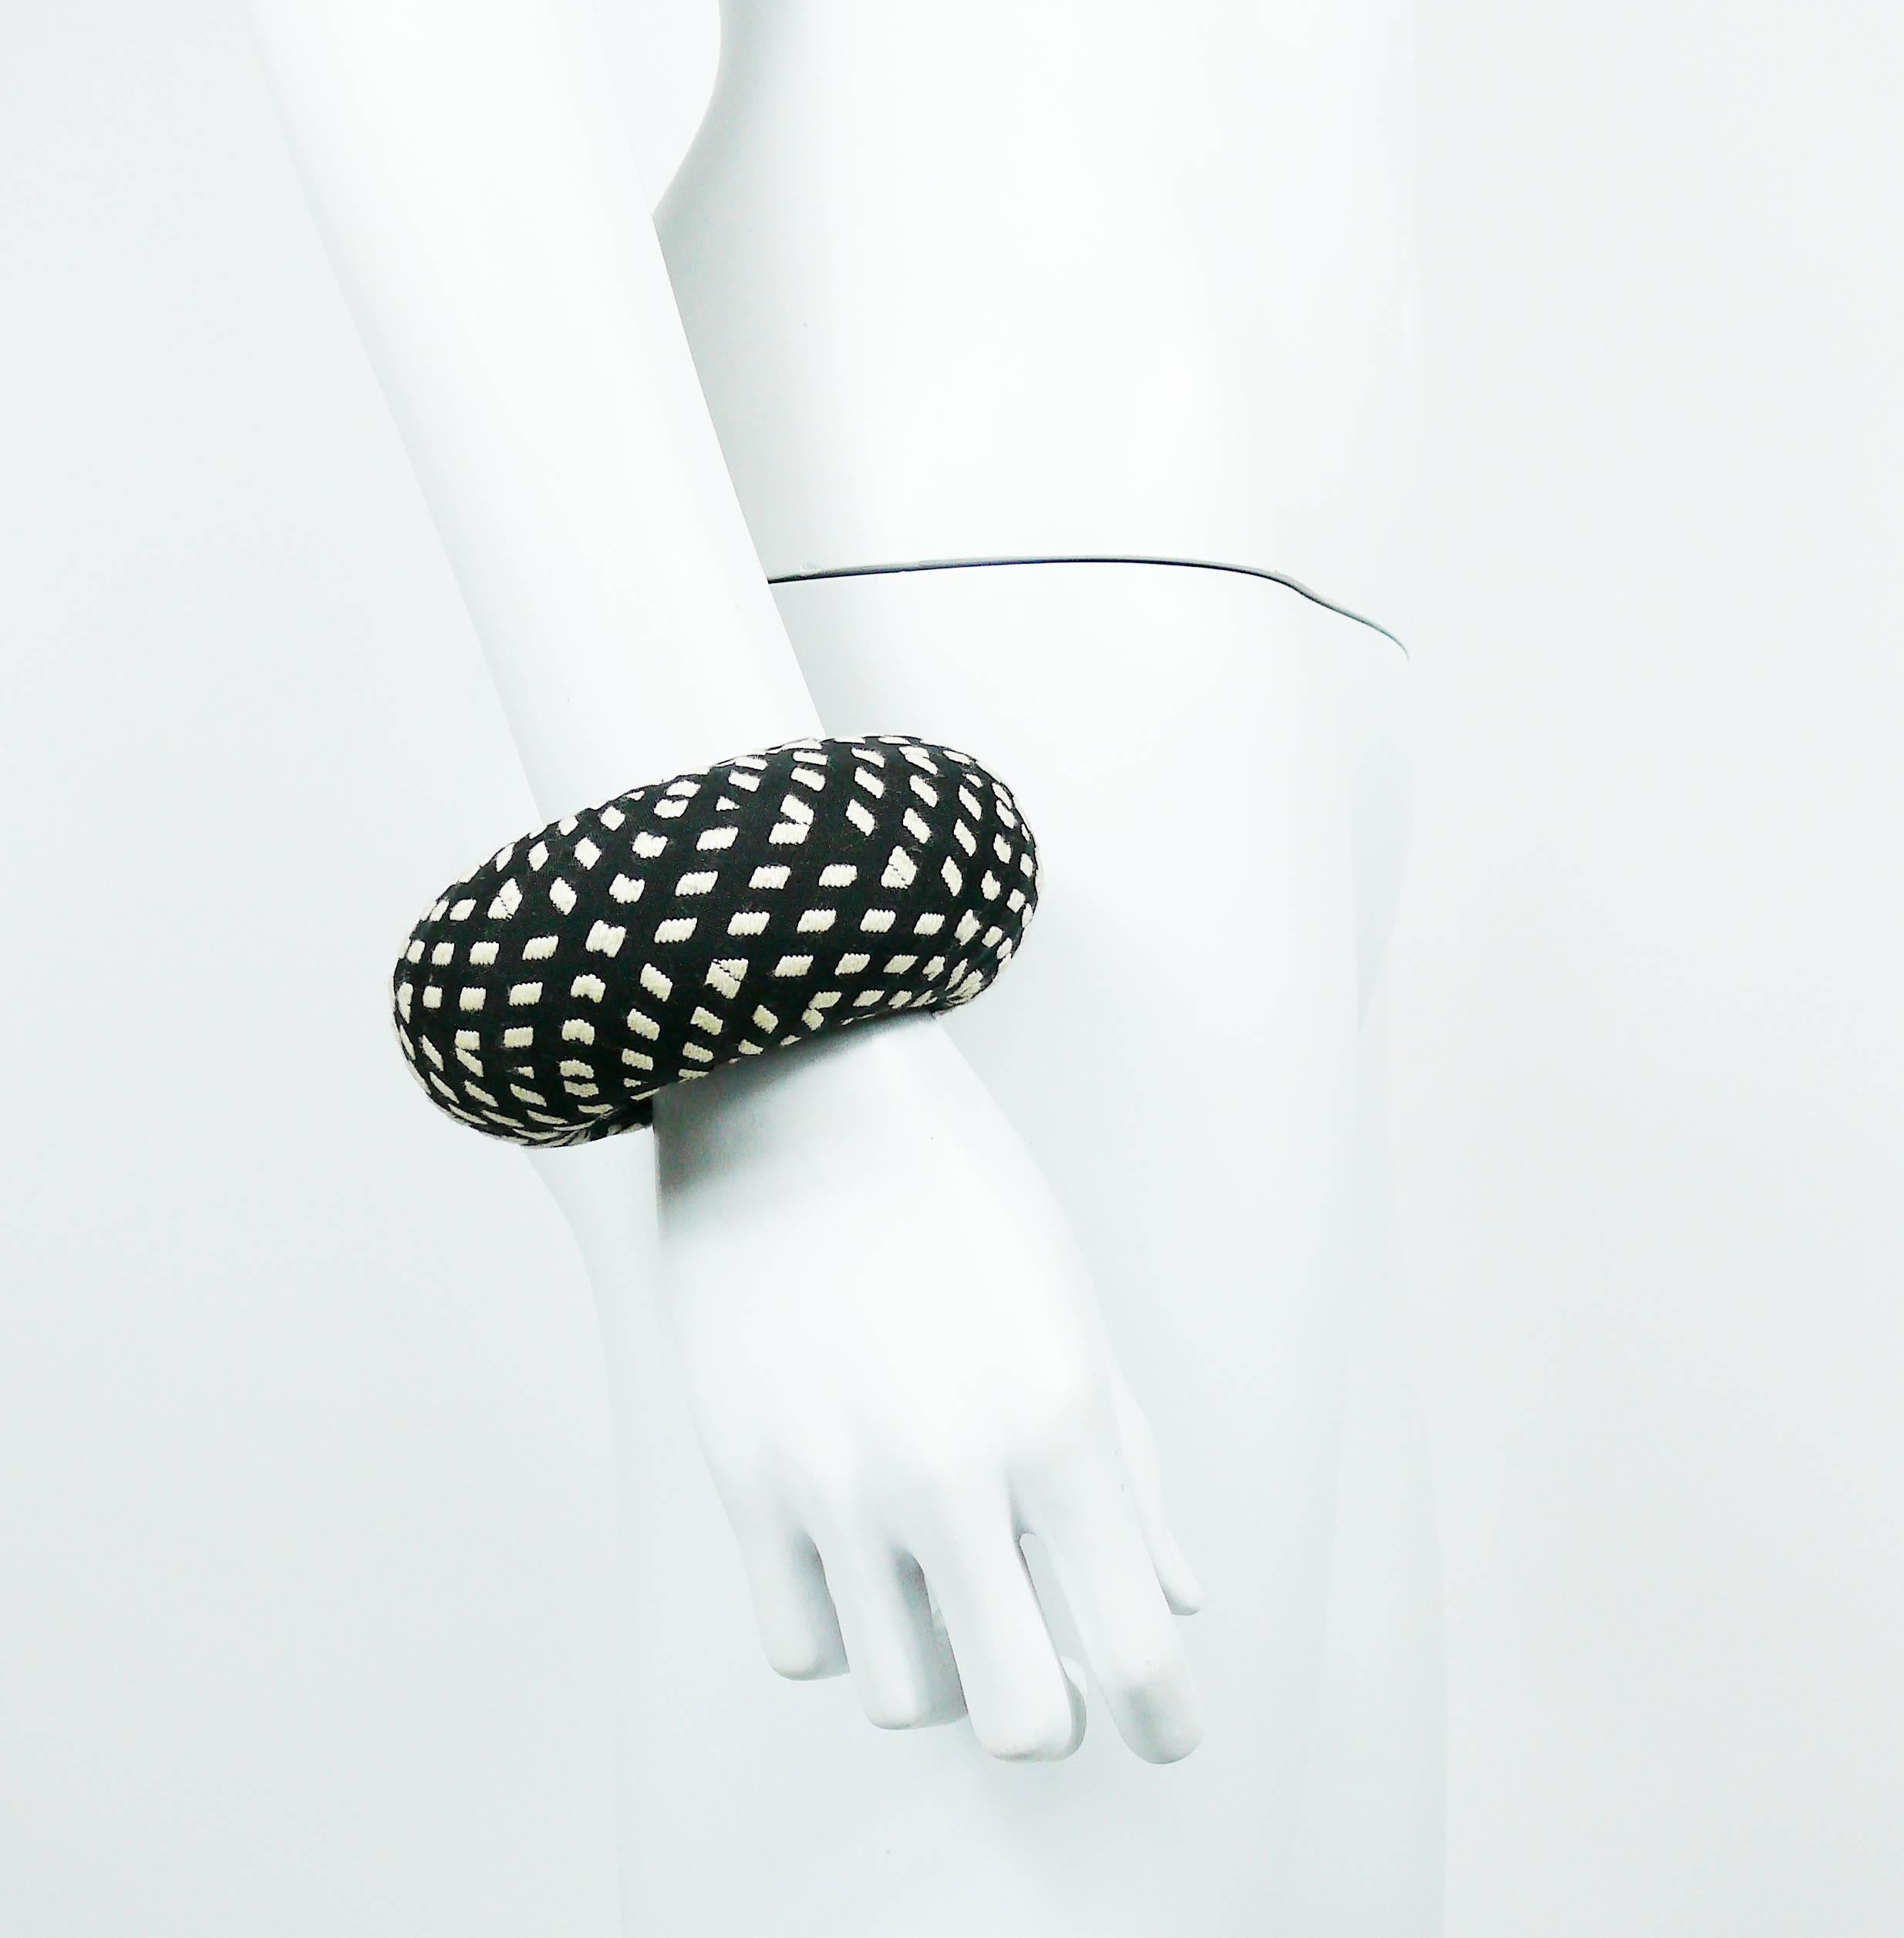 CHRISTIAN LACROIX chunky bracelet in black and white fabric.

Runway model from the Spring 2008 Ready-To-Wear runway show.

Unsigned.
Documented (see photo attached).

Indicative measurements : diameter approx. 11 cm (4.33 inches) / inner